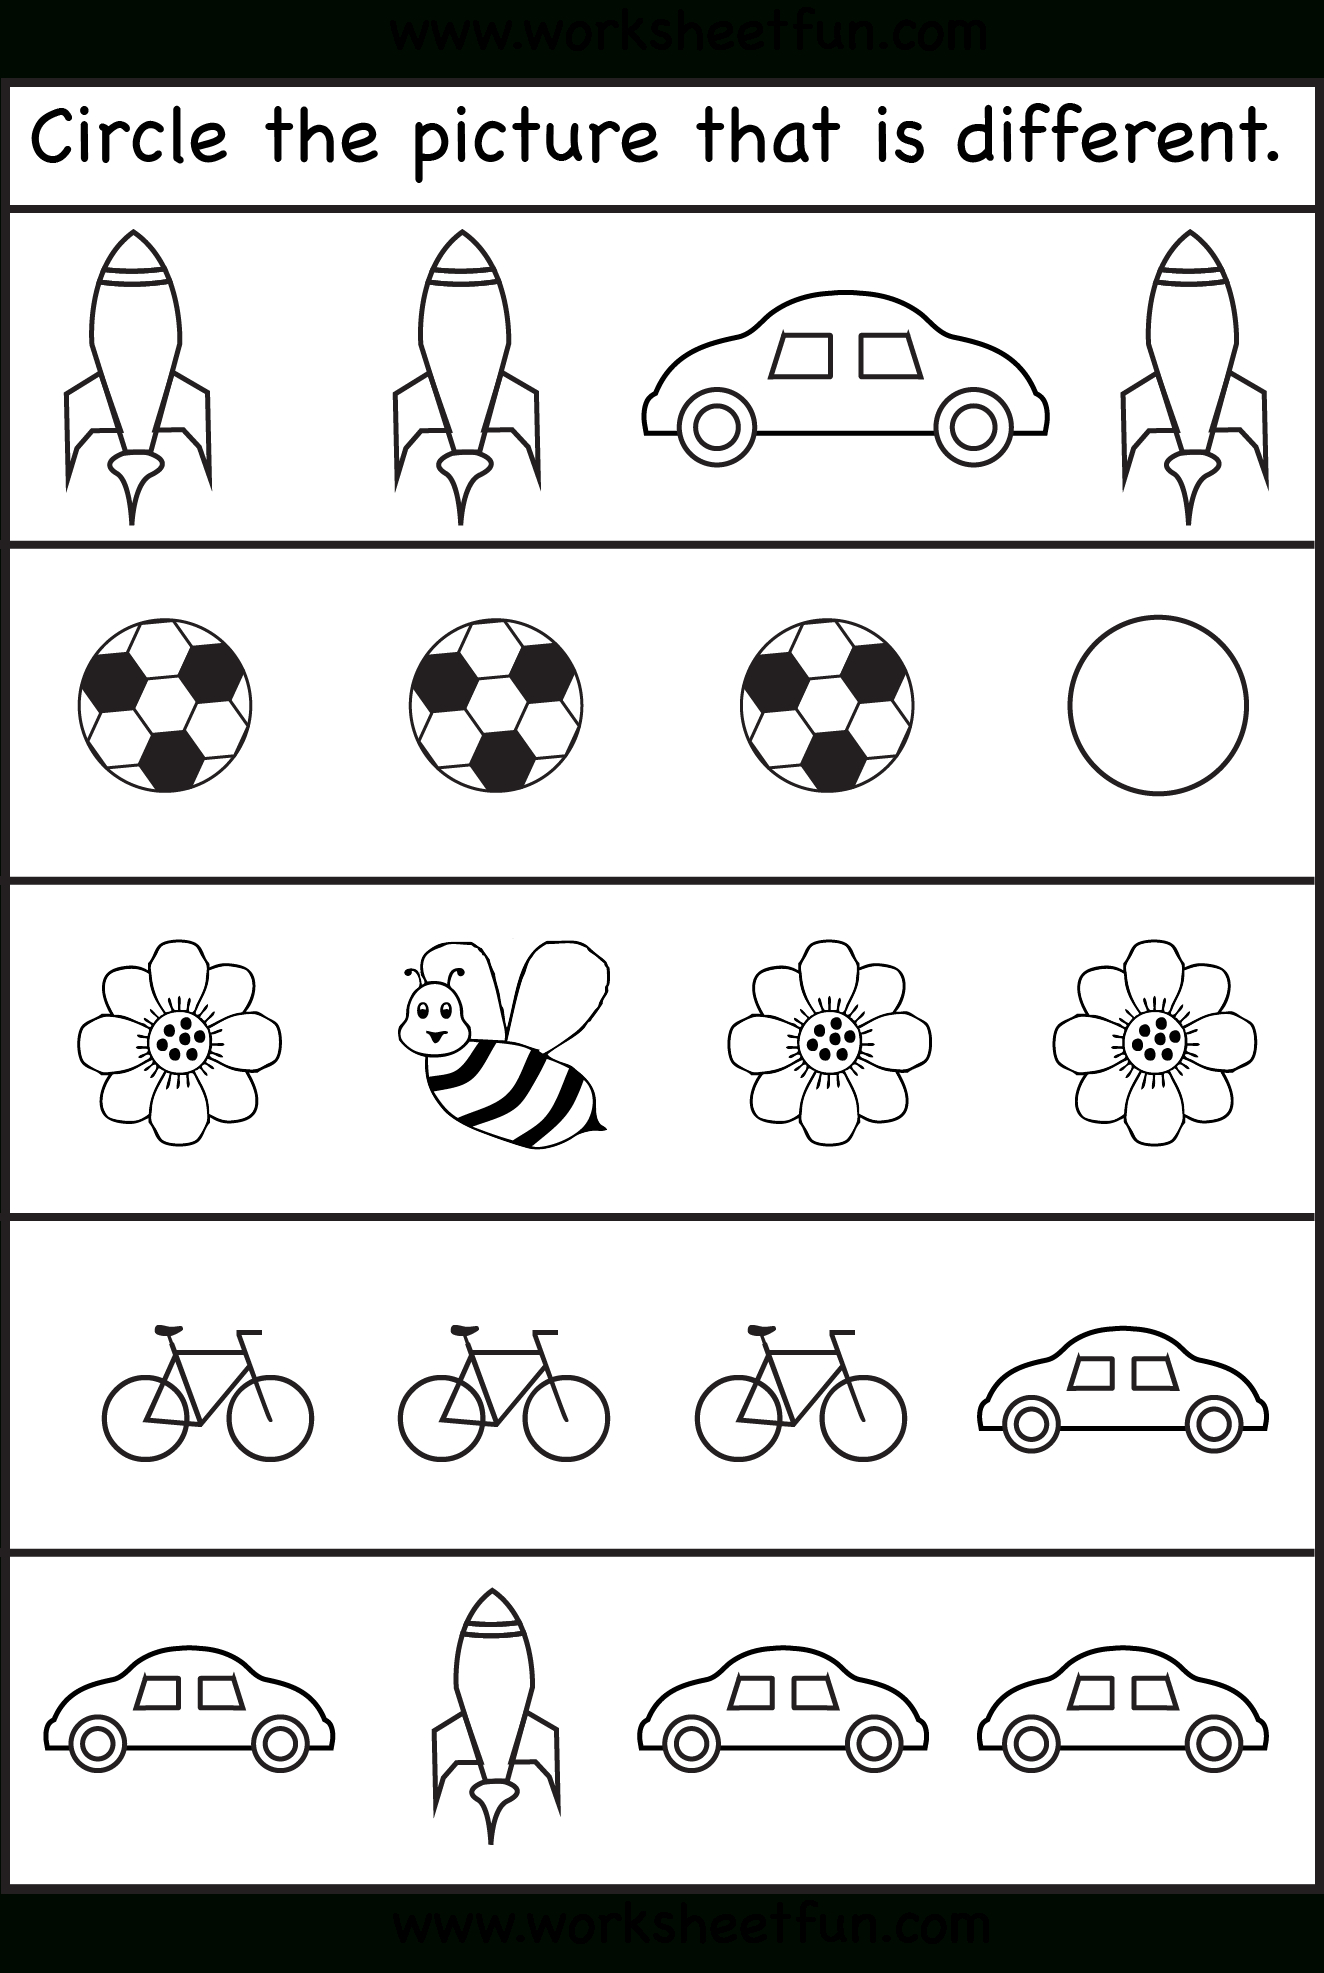 Circle The Picture That Is Different - 4 Worksheets | Preschool Work - Free Printable Toddler Learning Worksheets